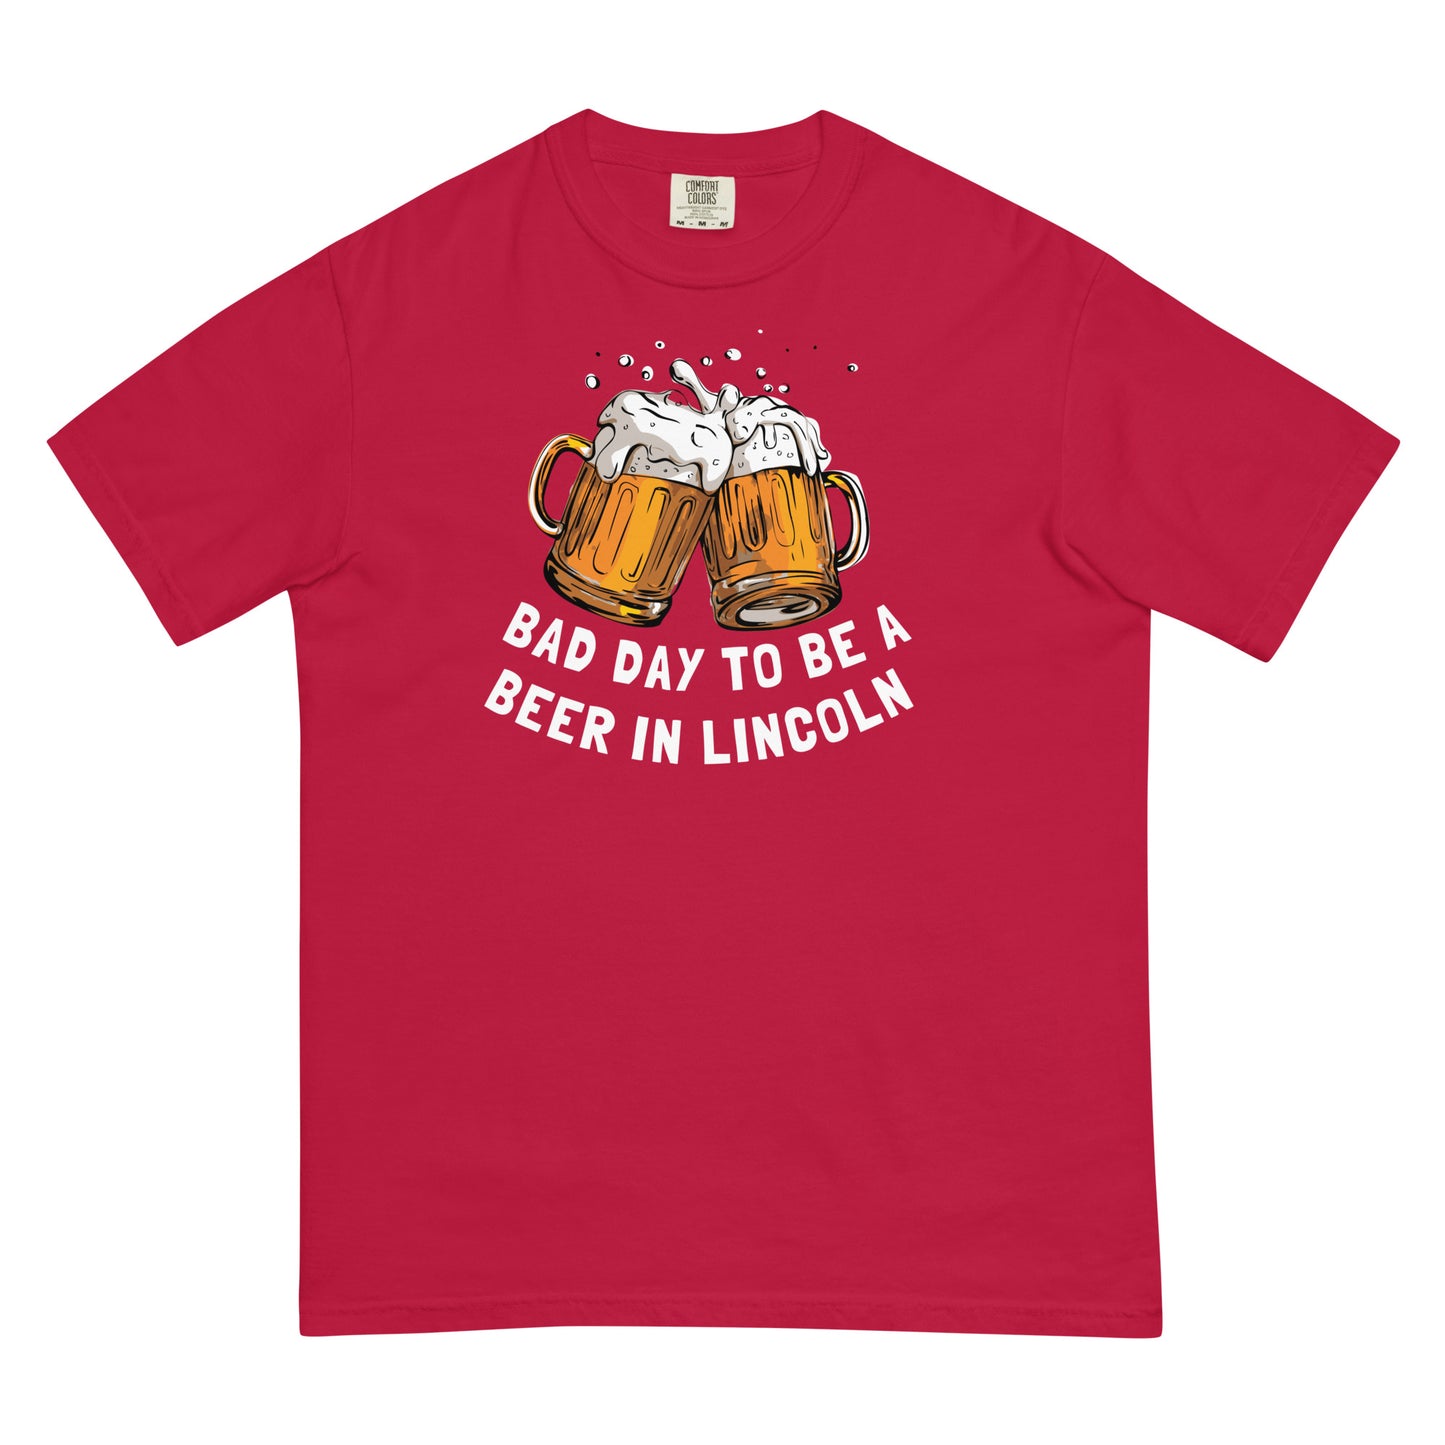 Bad Day To Be A Beer T-shirt